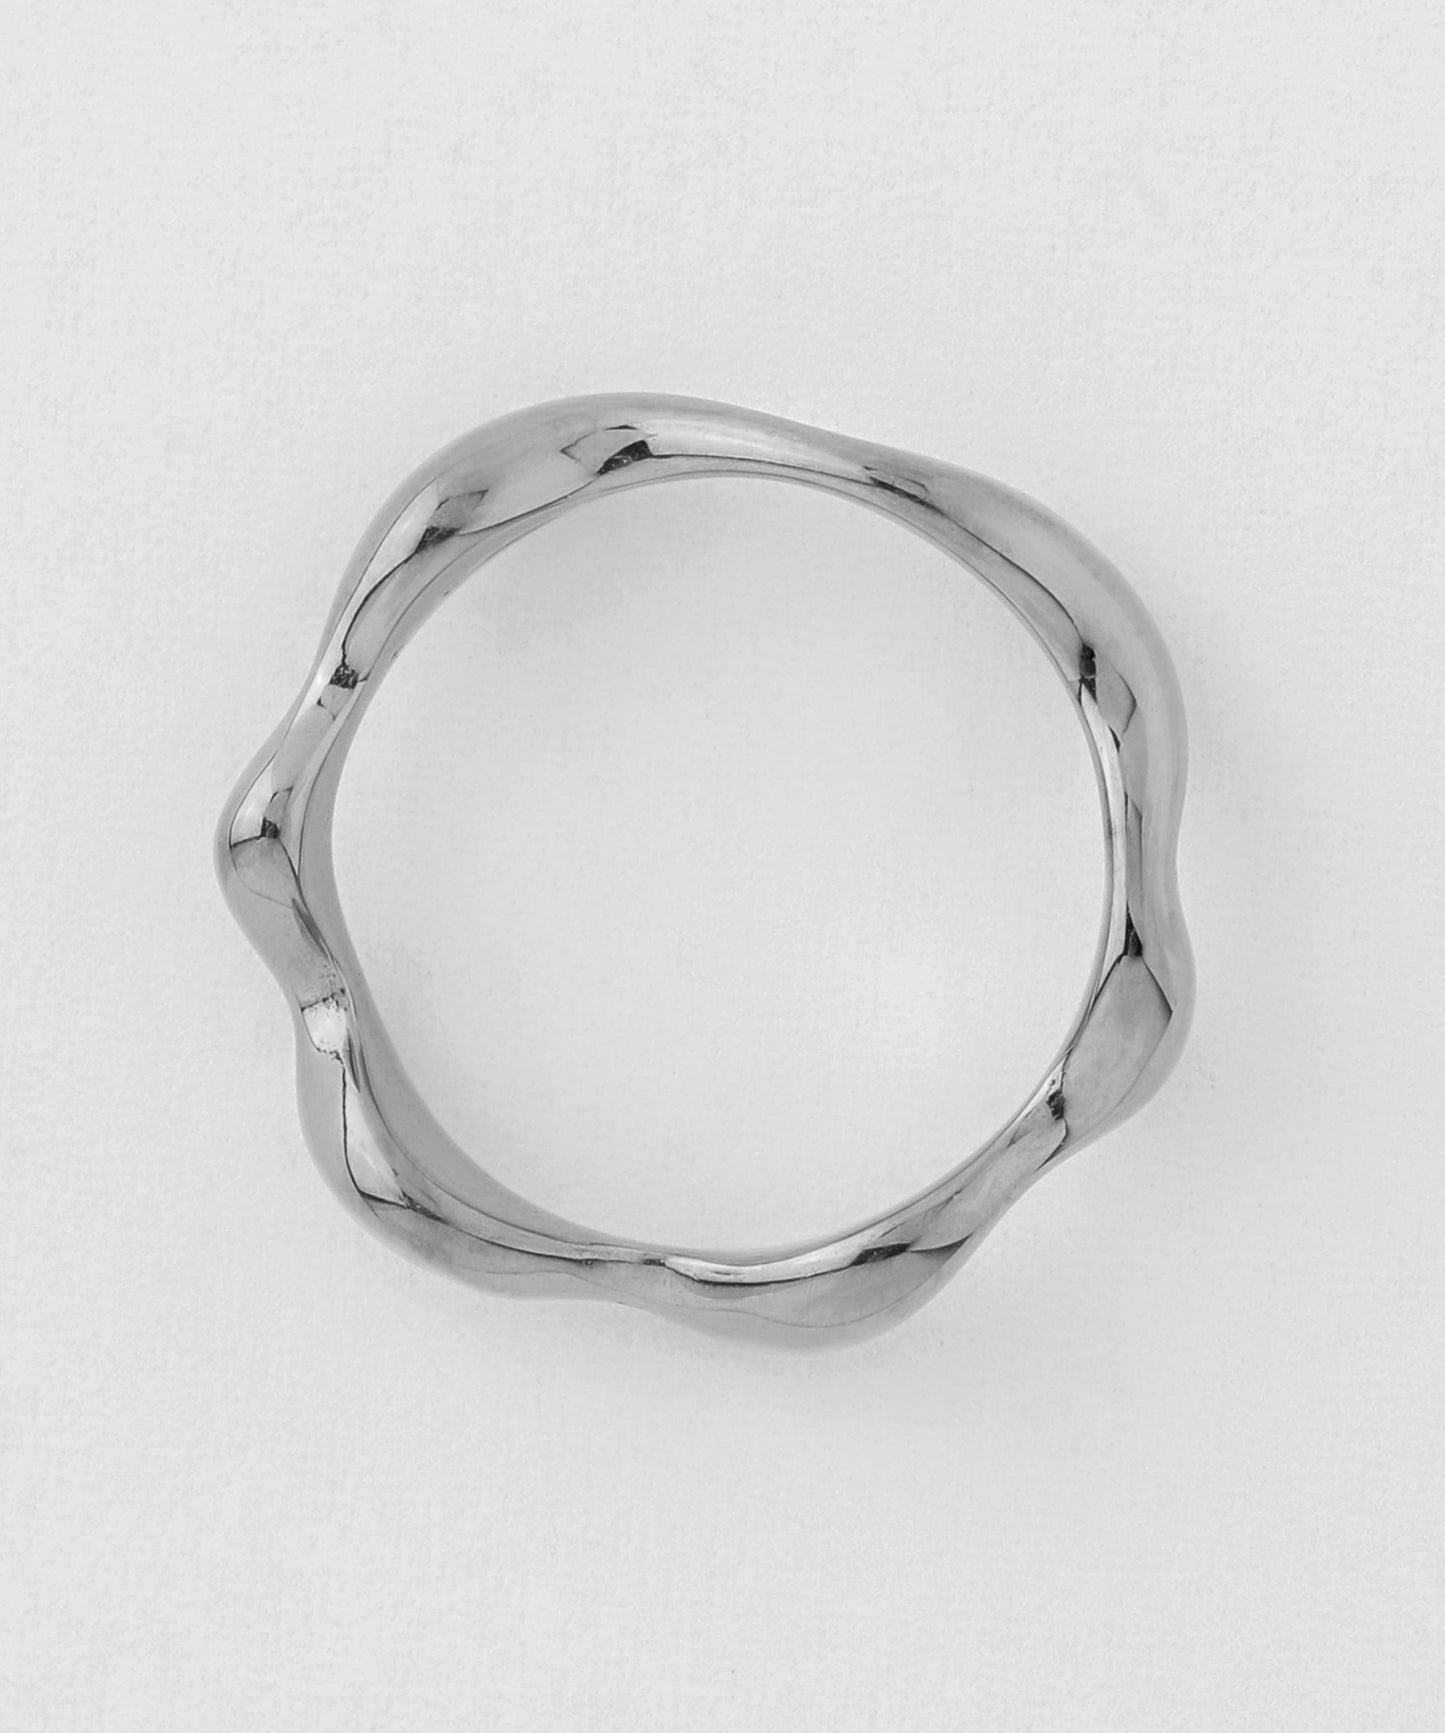 【Stainless Seel】Nuanced Wave Ring